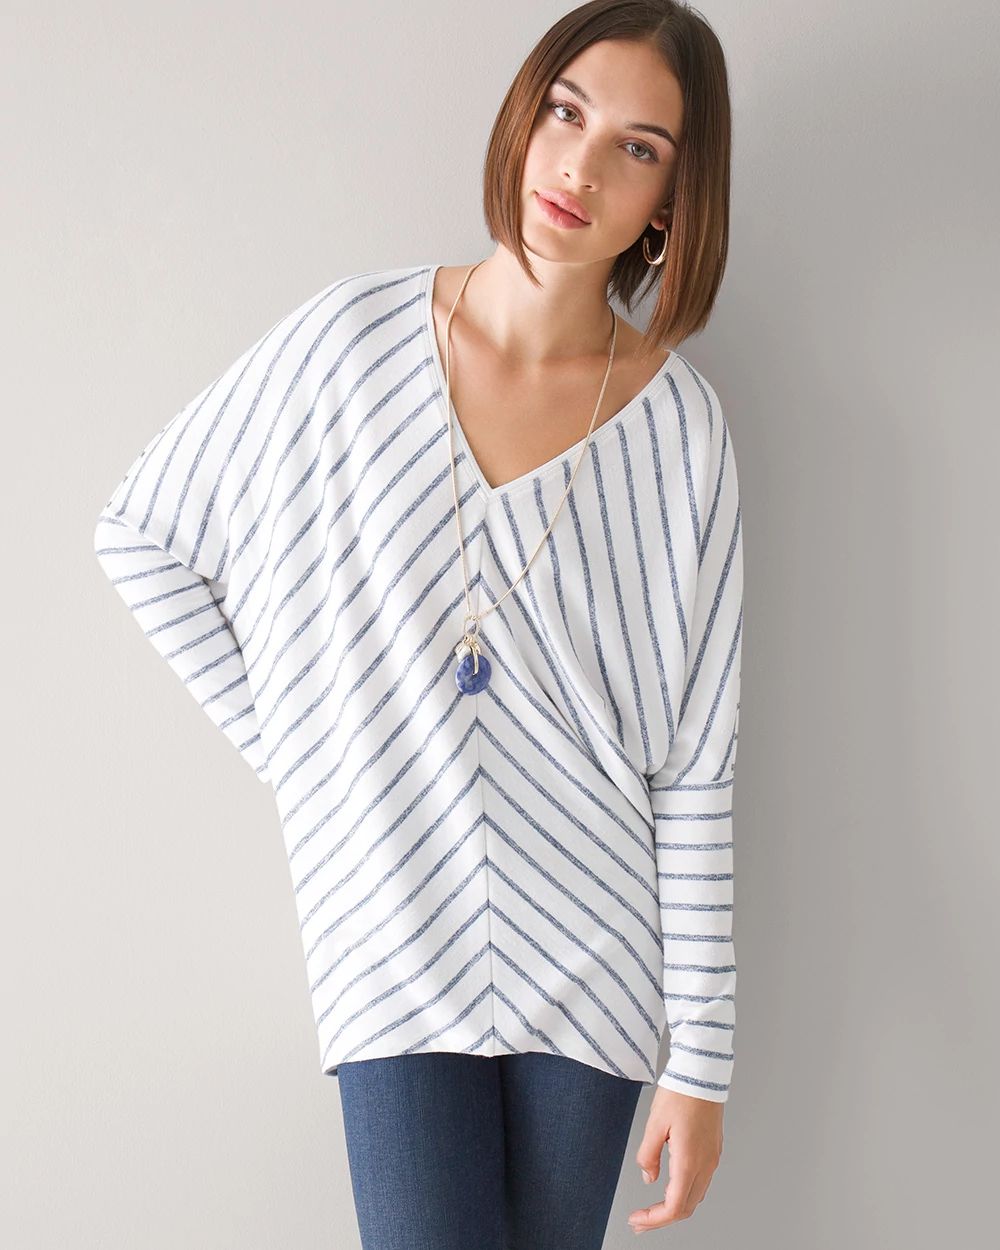 Stretch Knit Dolman Tunic click to view larger image.